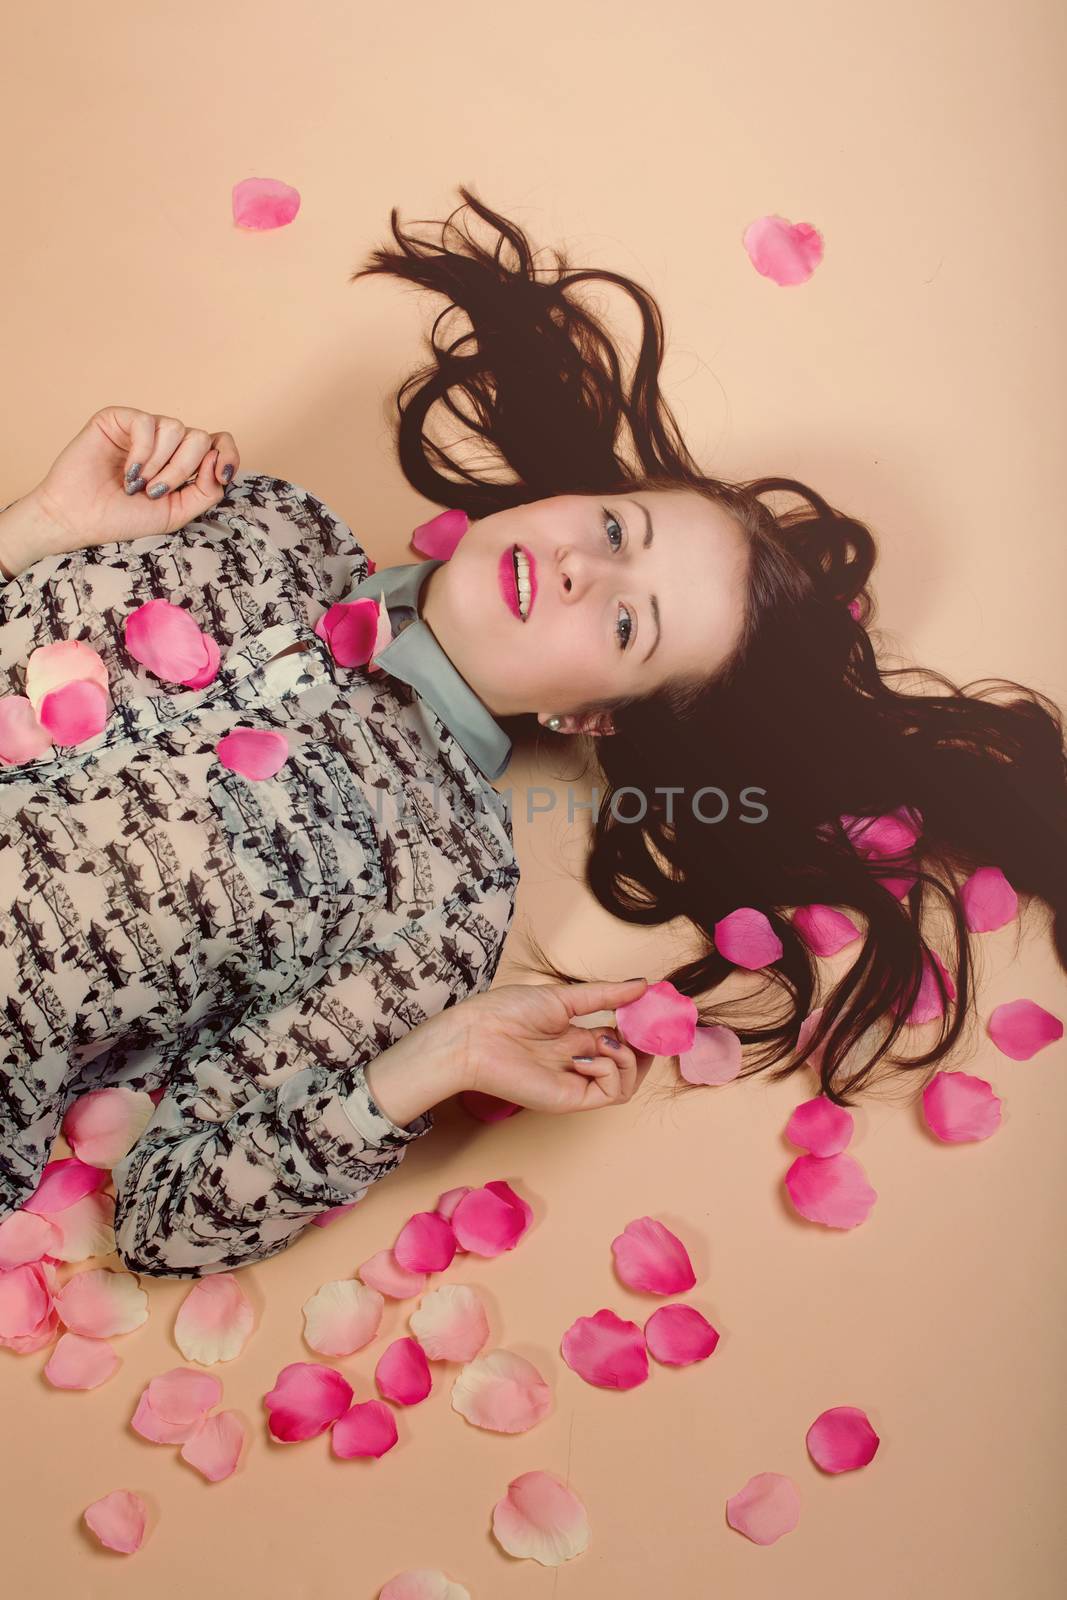 atractive brunette girl lying on beige background, with rose petals around. Beaty concept.